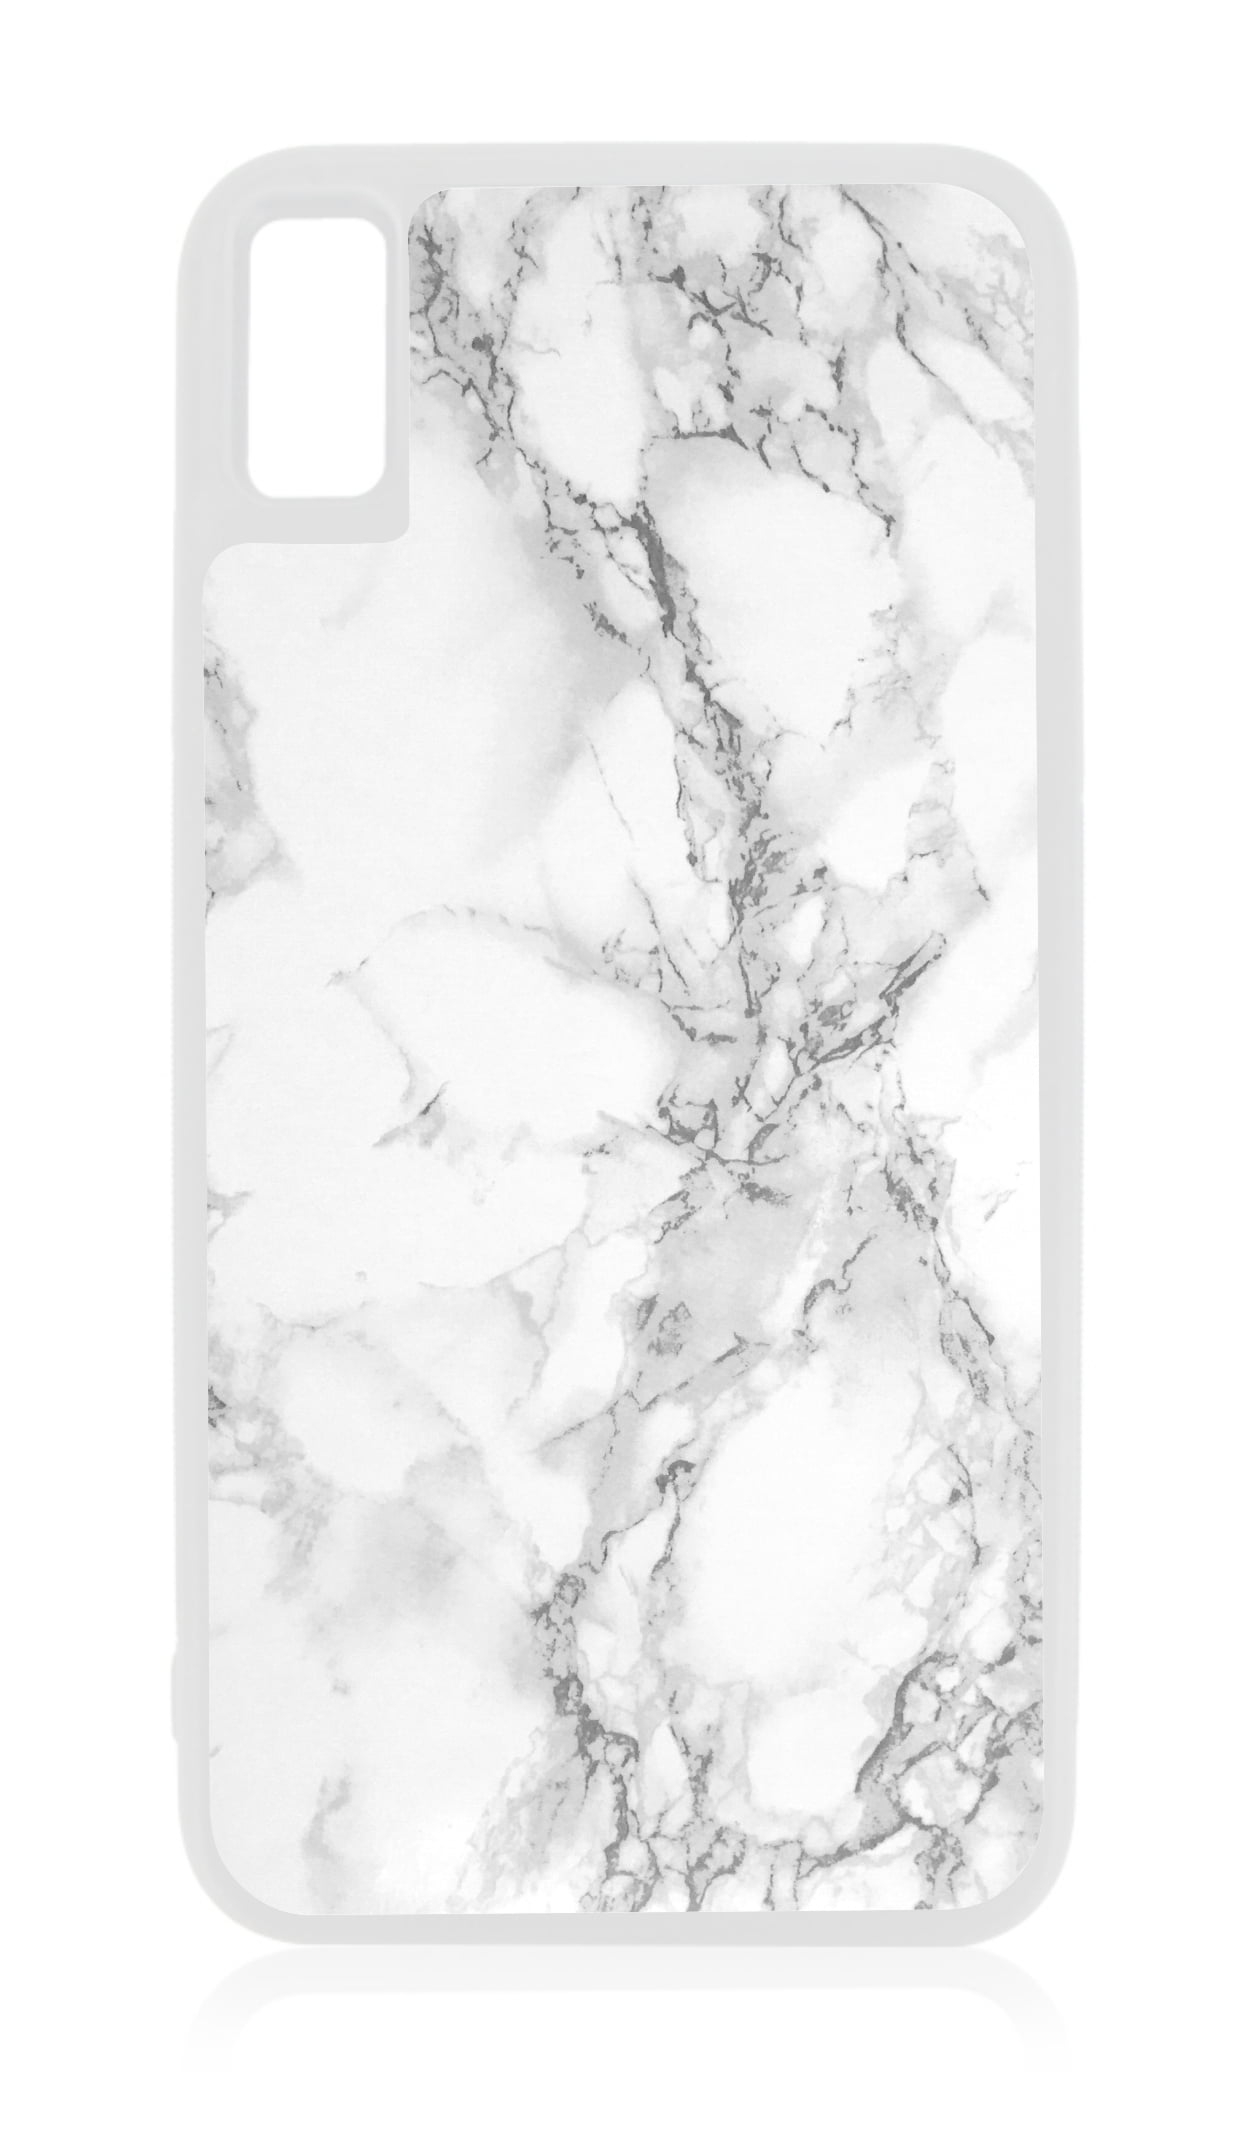 Grey And White Iphone Xr Marble Case 10 Xr Marble Phone Case Iphone 10 Xr Marble Case White Rubber Case For Iphone Xr Iphone Xr Phone Case Iphone Xr Accessories Walmart Com